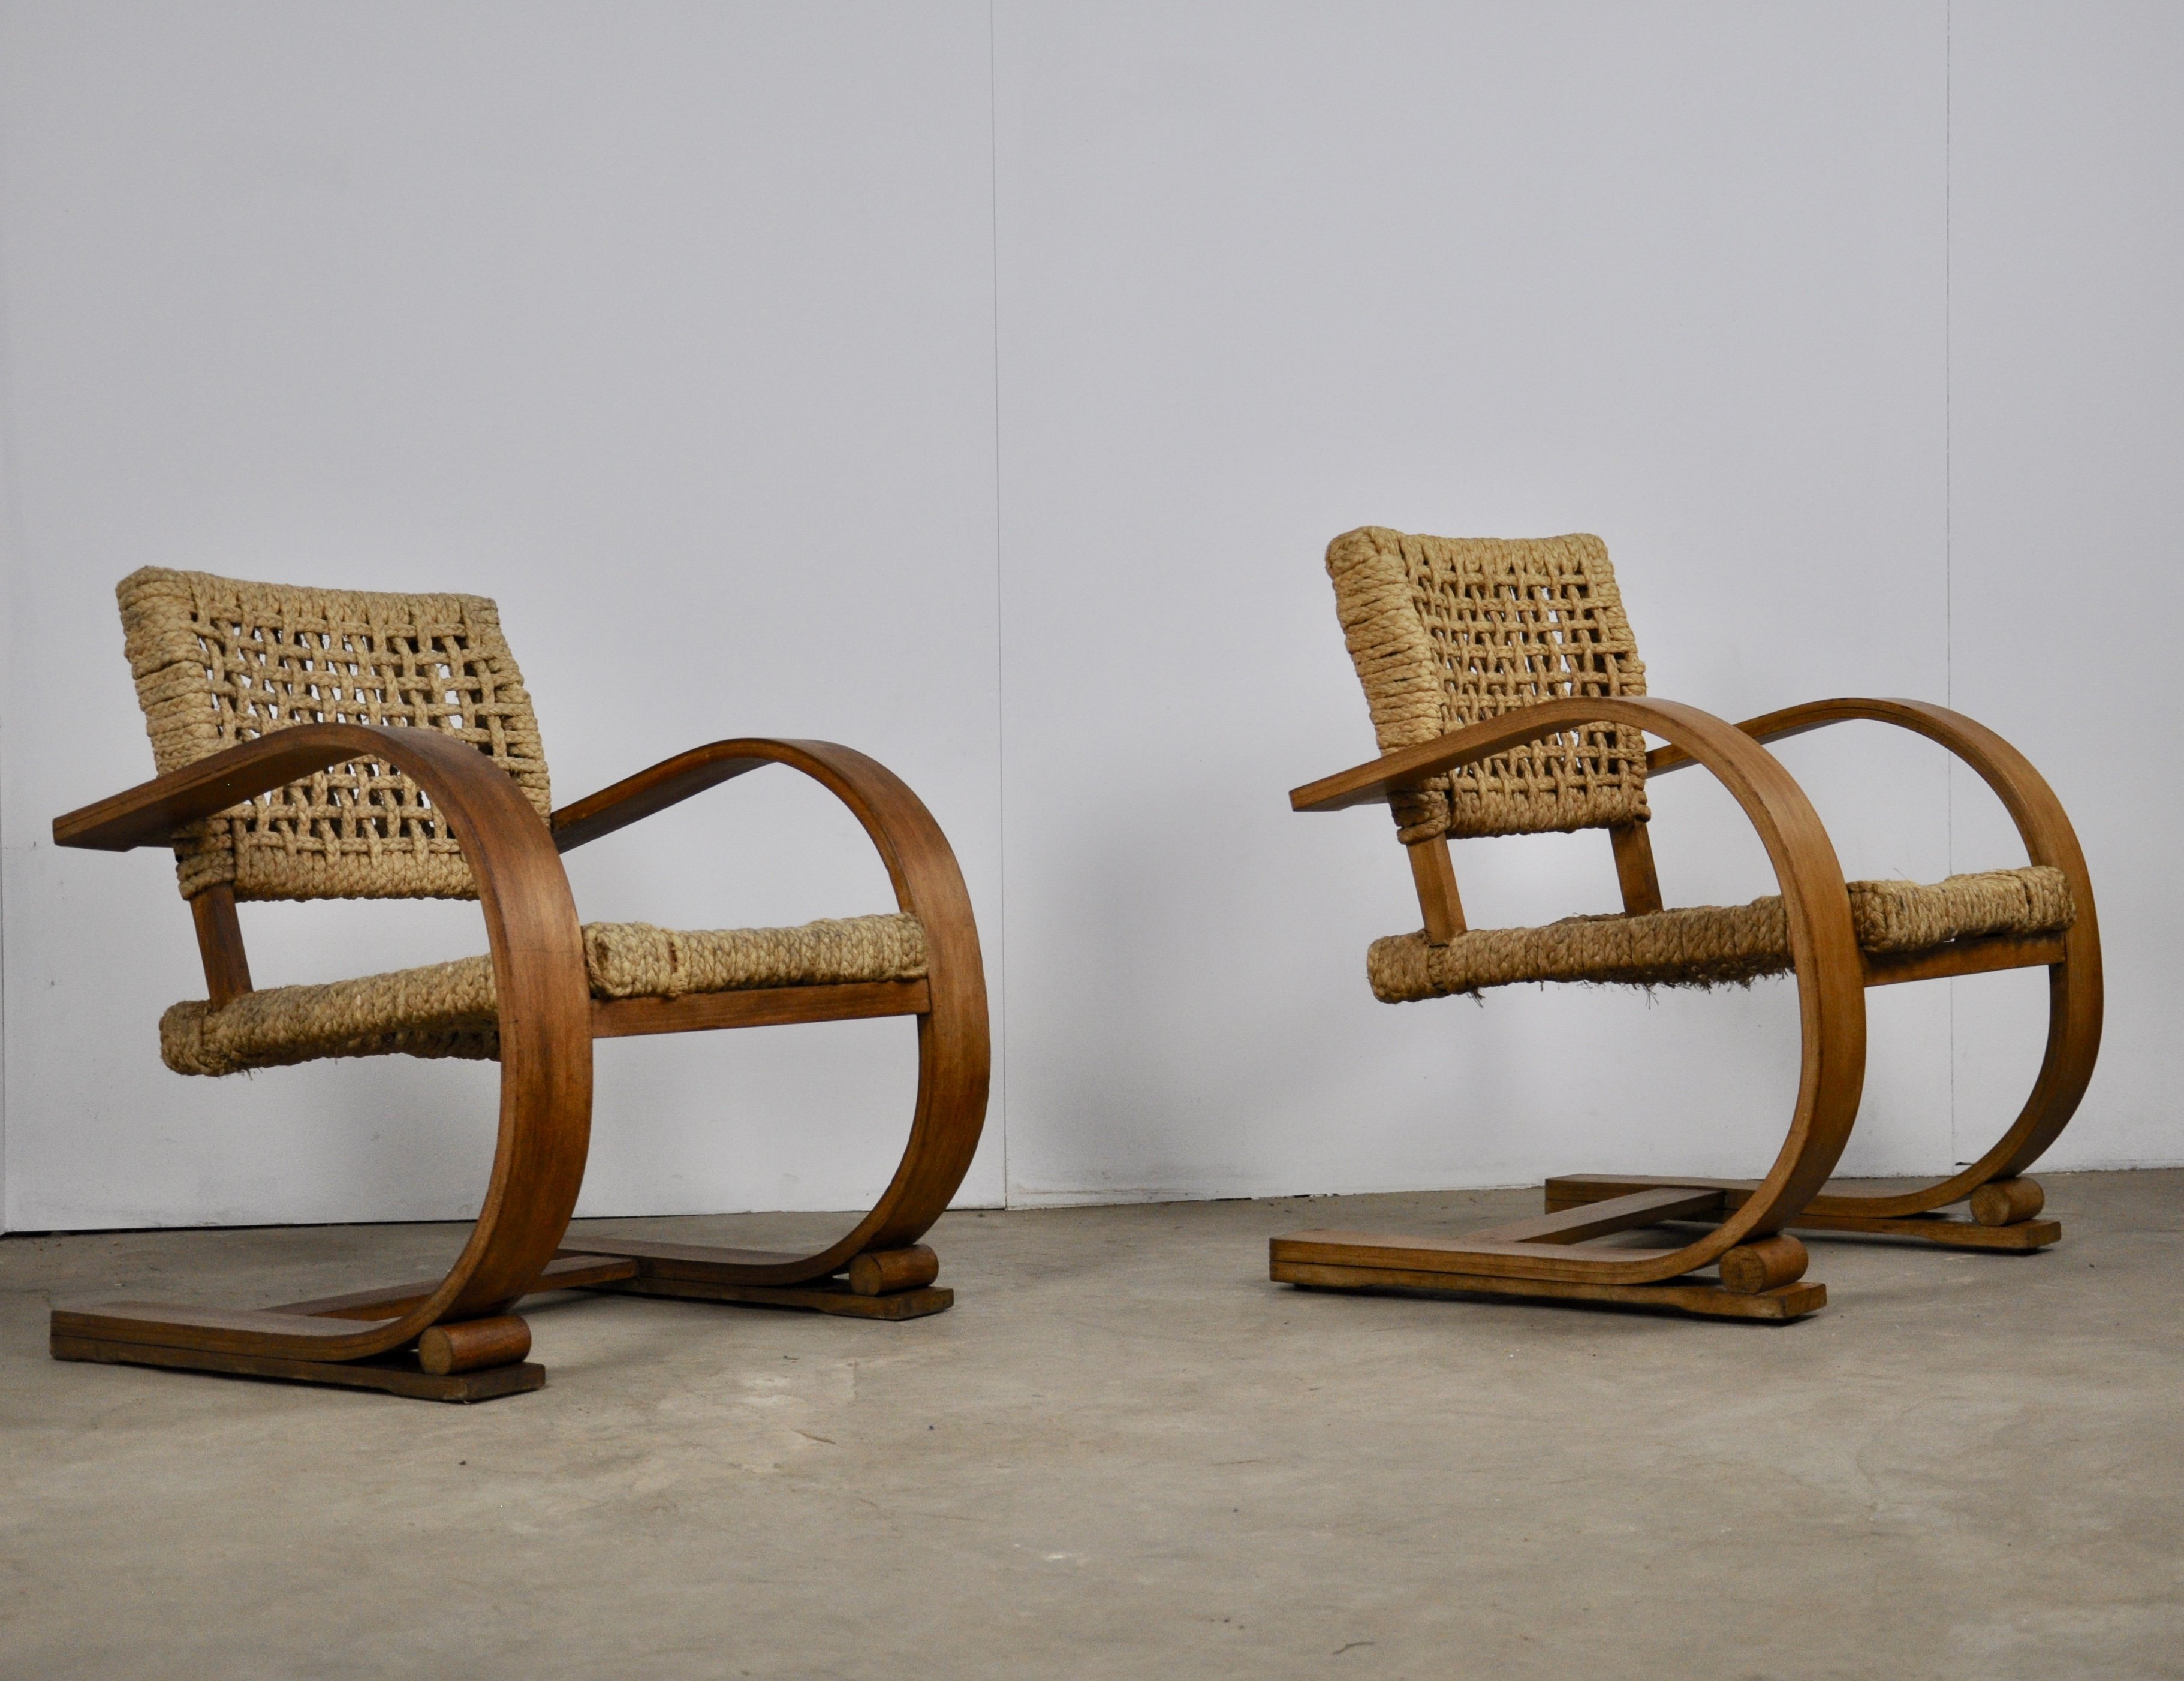 2 x Lounge chairs by Adrien Audoux & Frida Minet for Vibo Vesoul ...